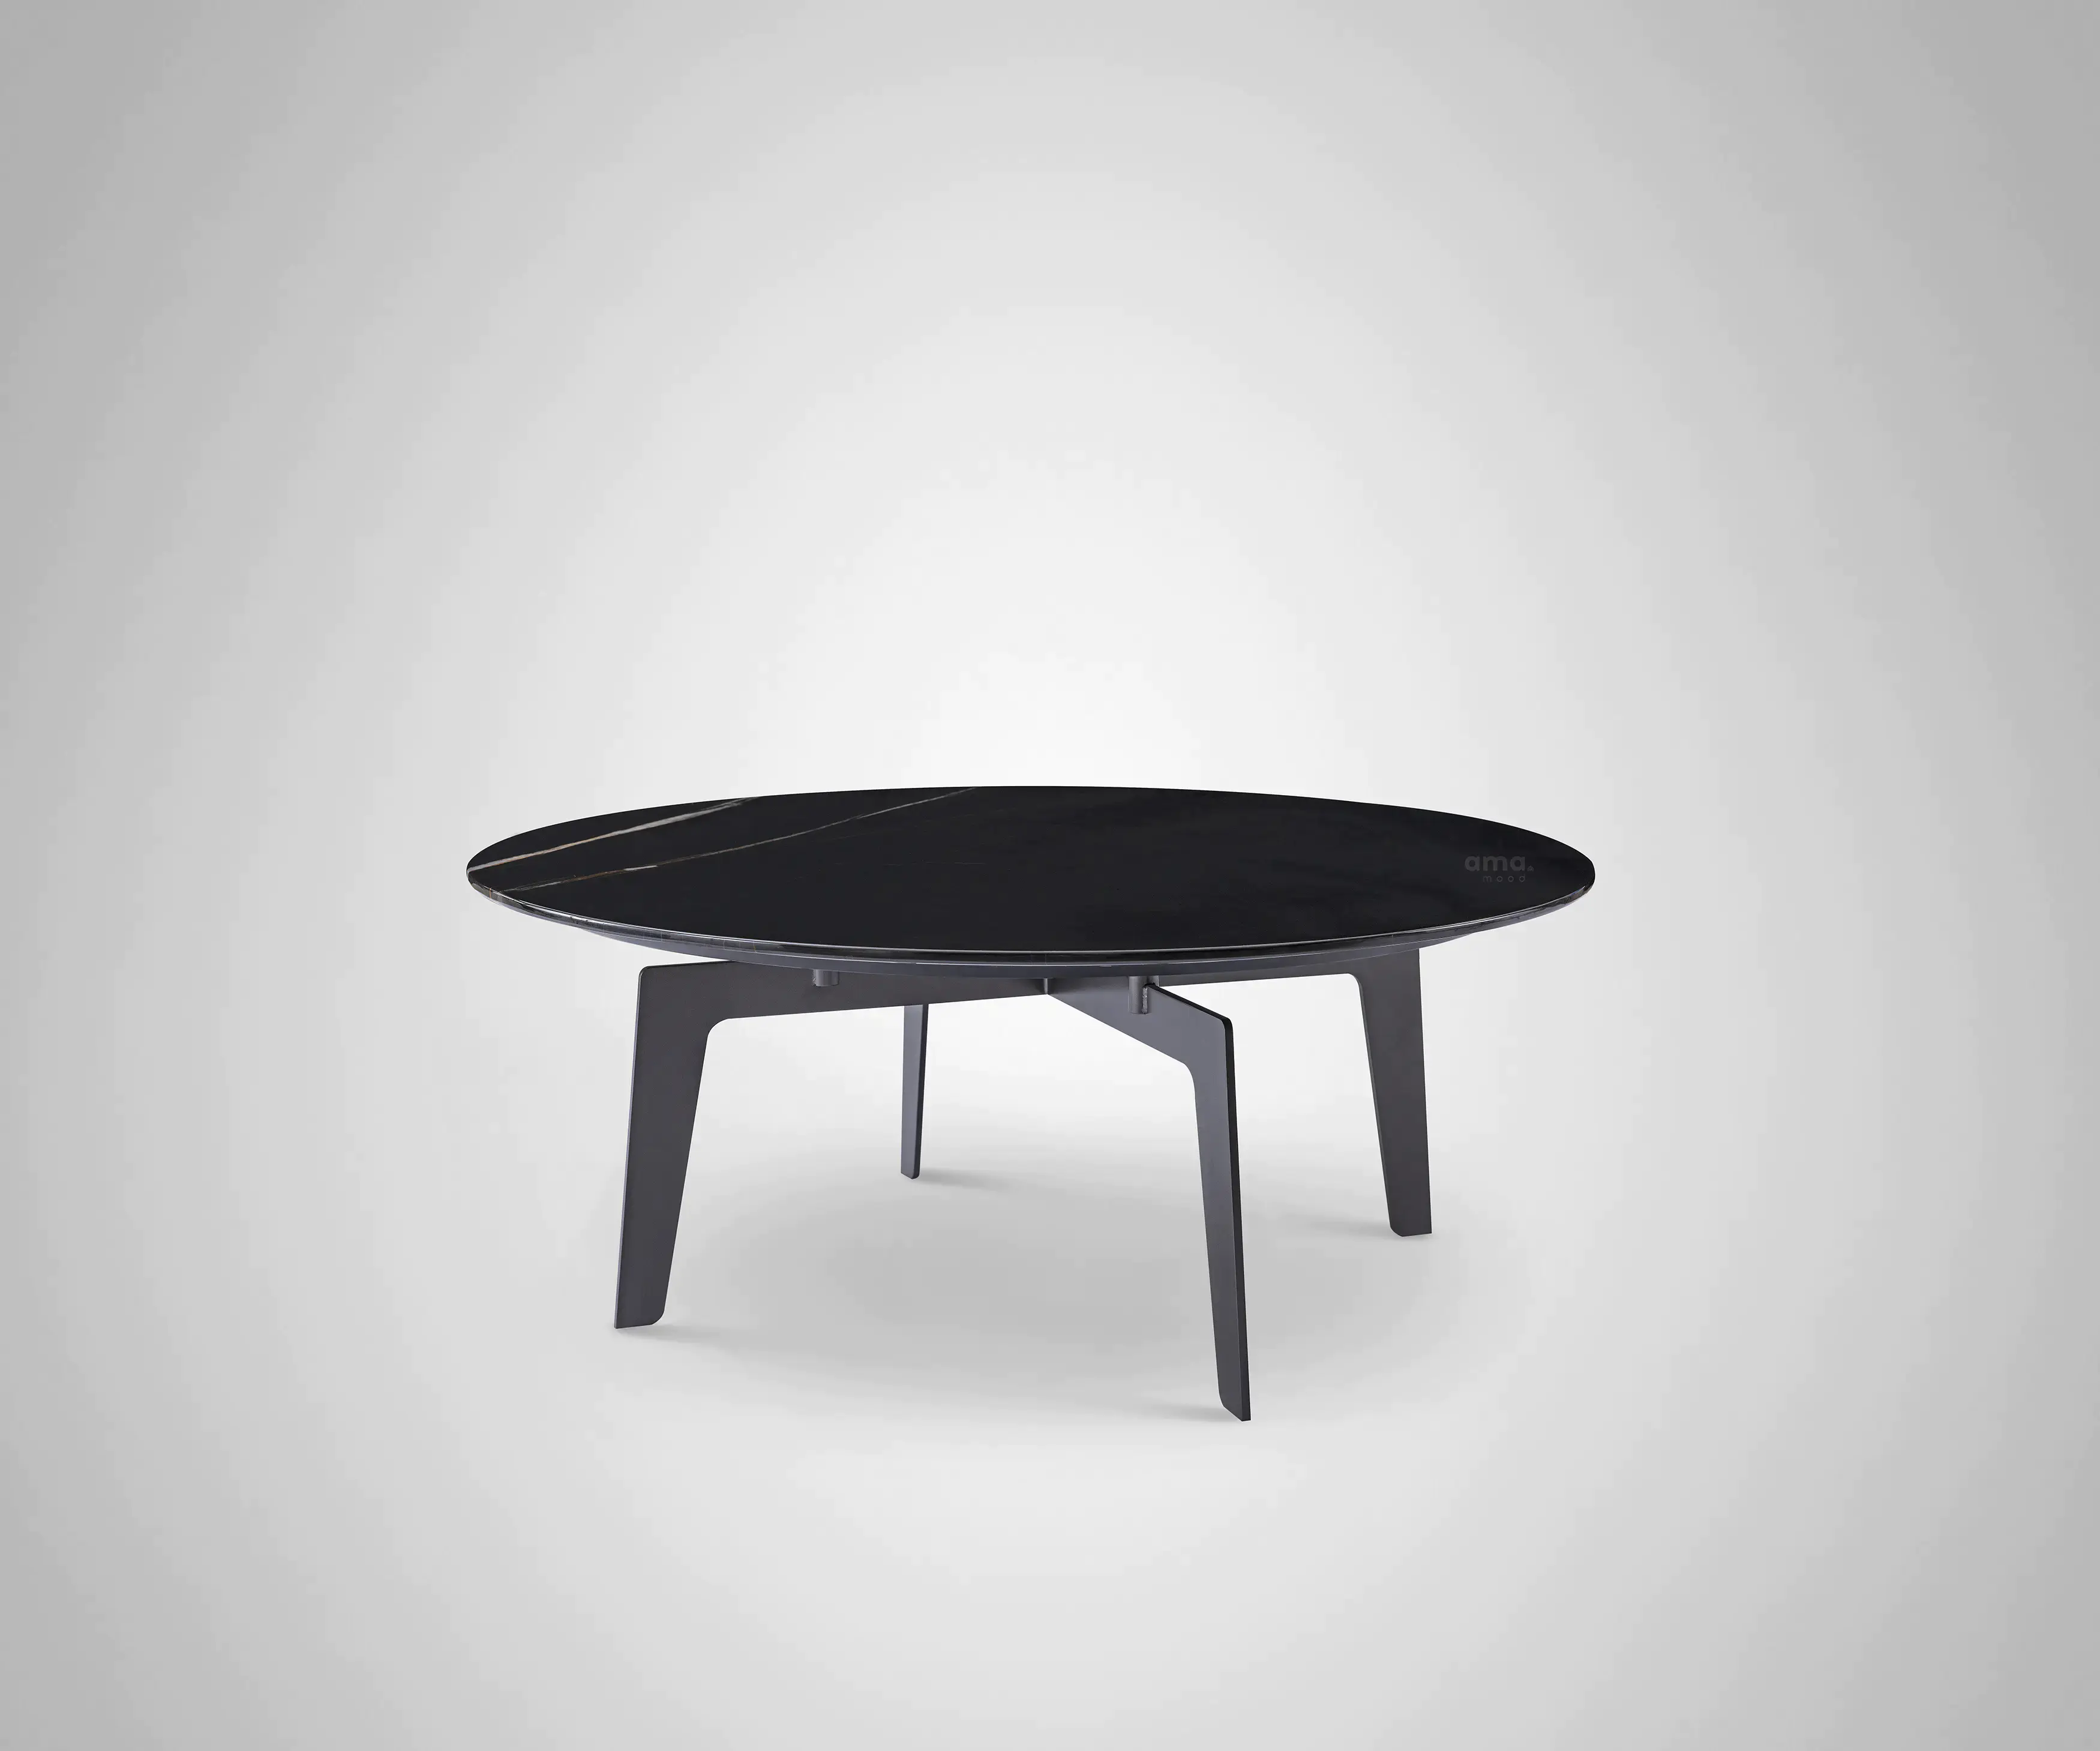 The Multifaceted Coffee Table A Central Fixture in Modern Living